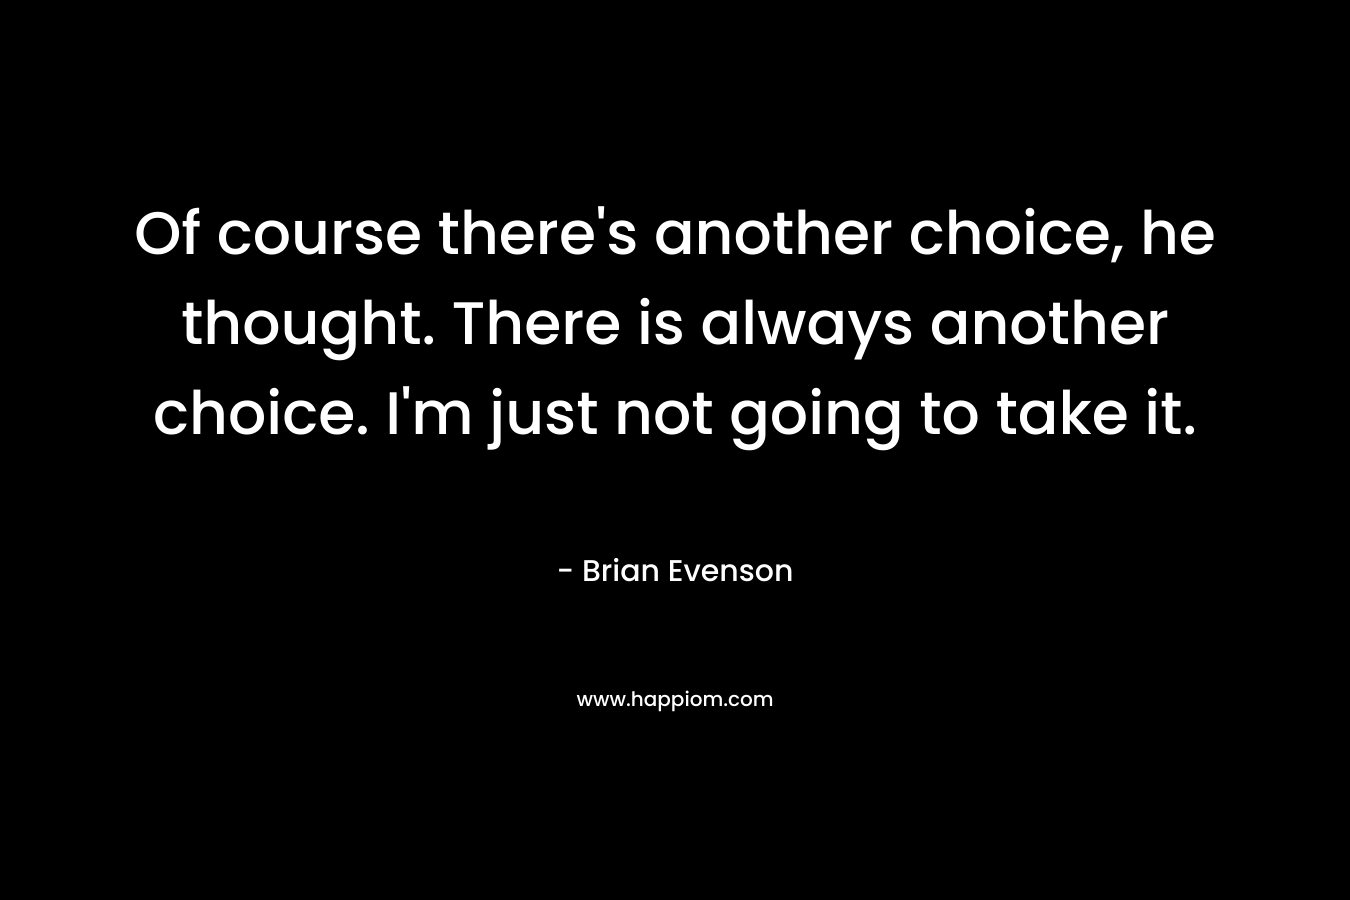 Of course there’s another choice, he thought. There is always another choice. I’m just not going to take it. – Brian Evenson